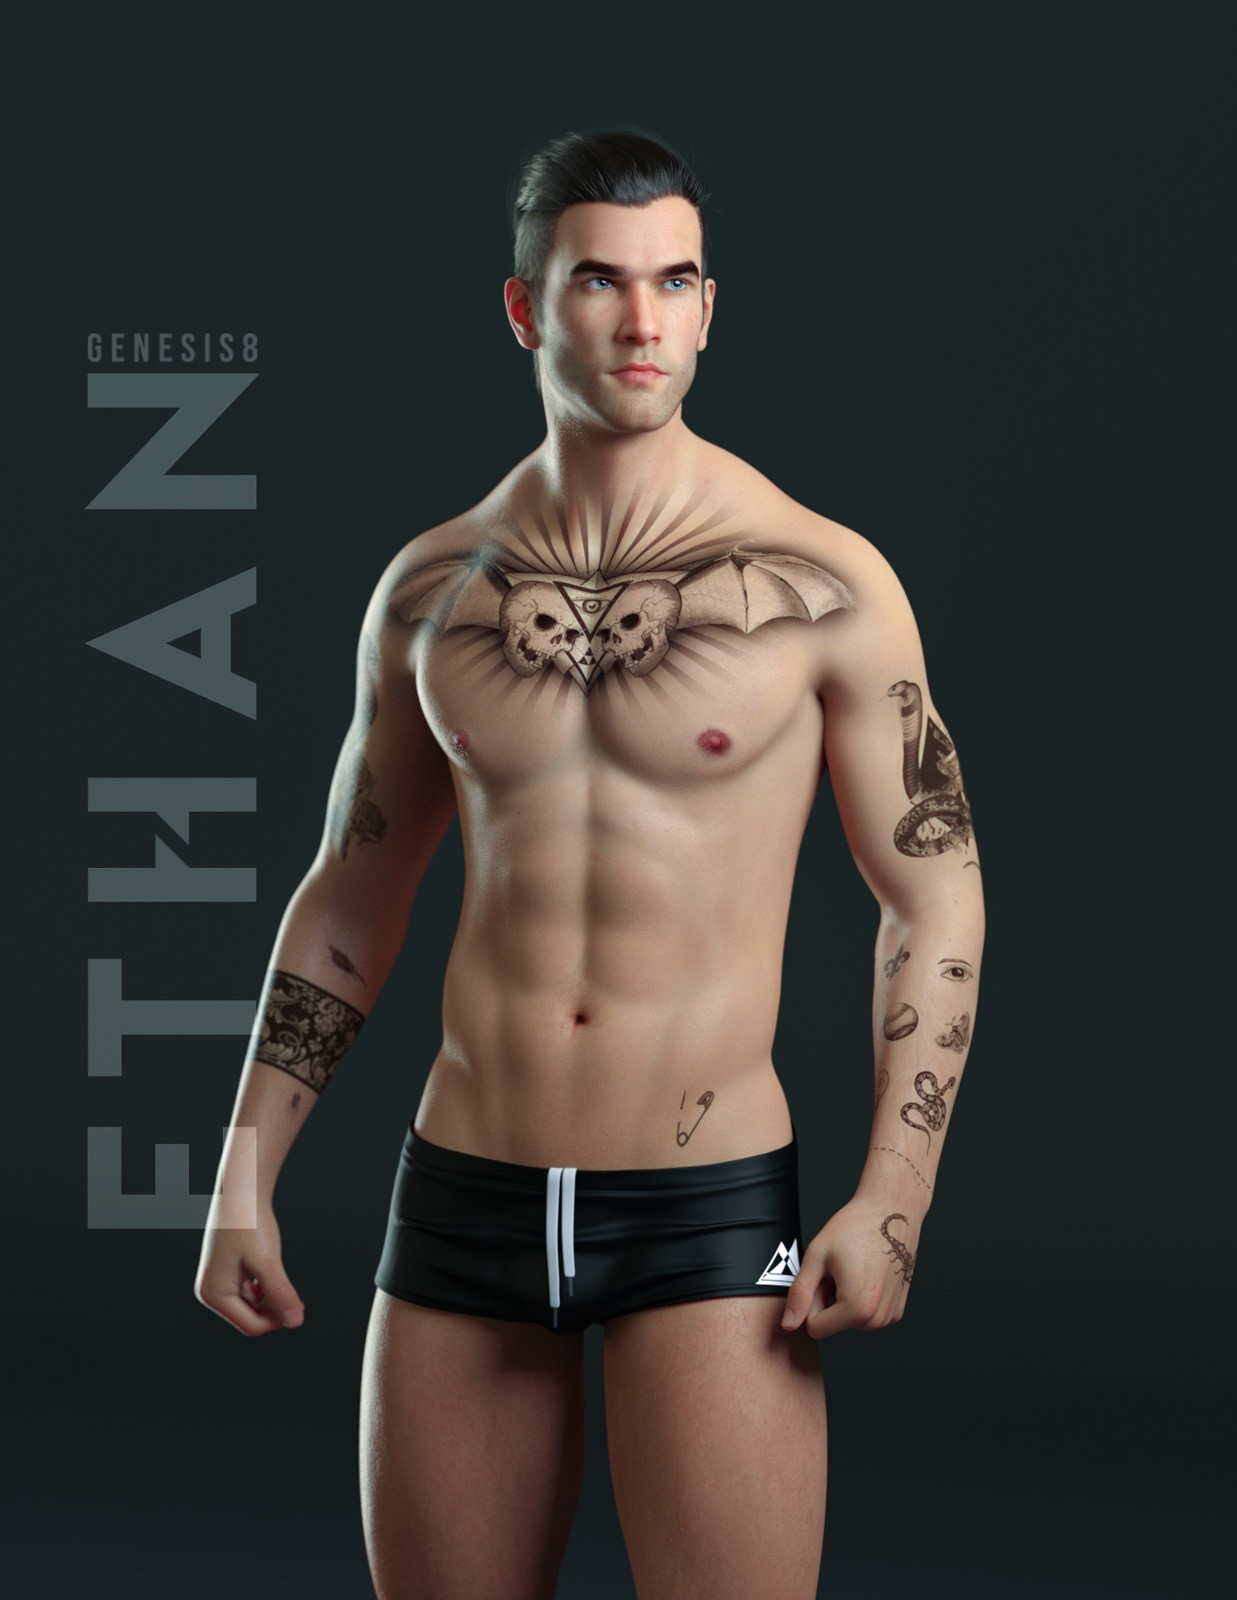 ethan-for-genesis-8-male